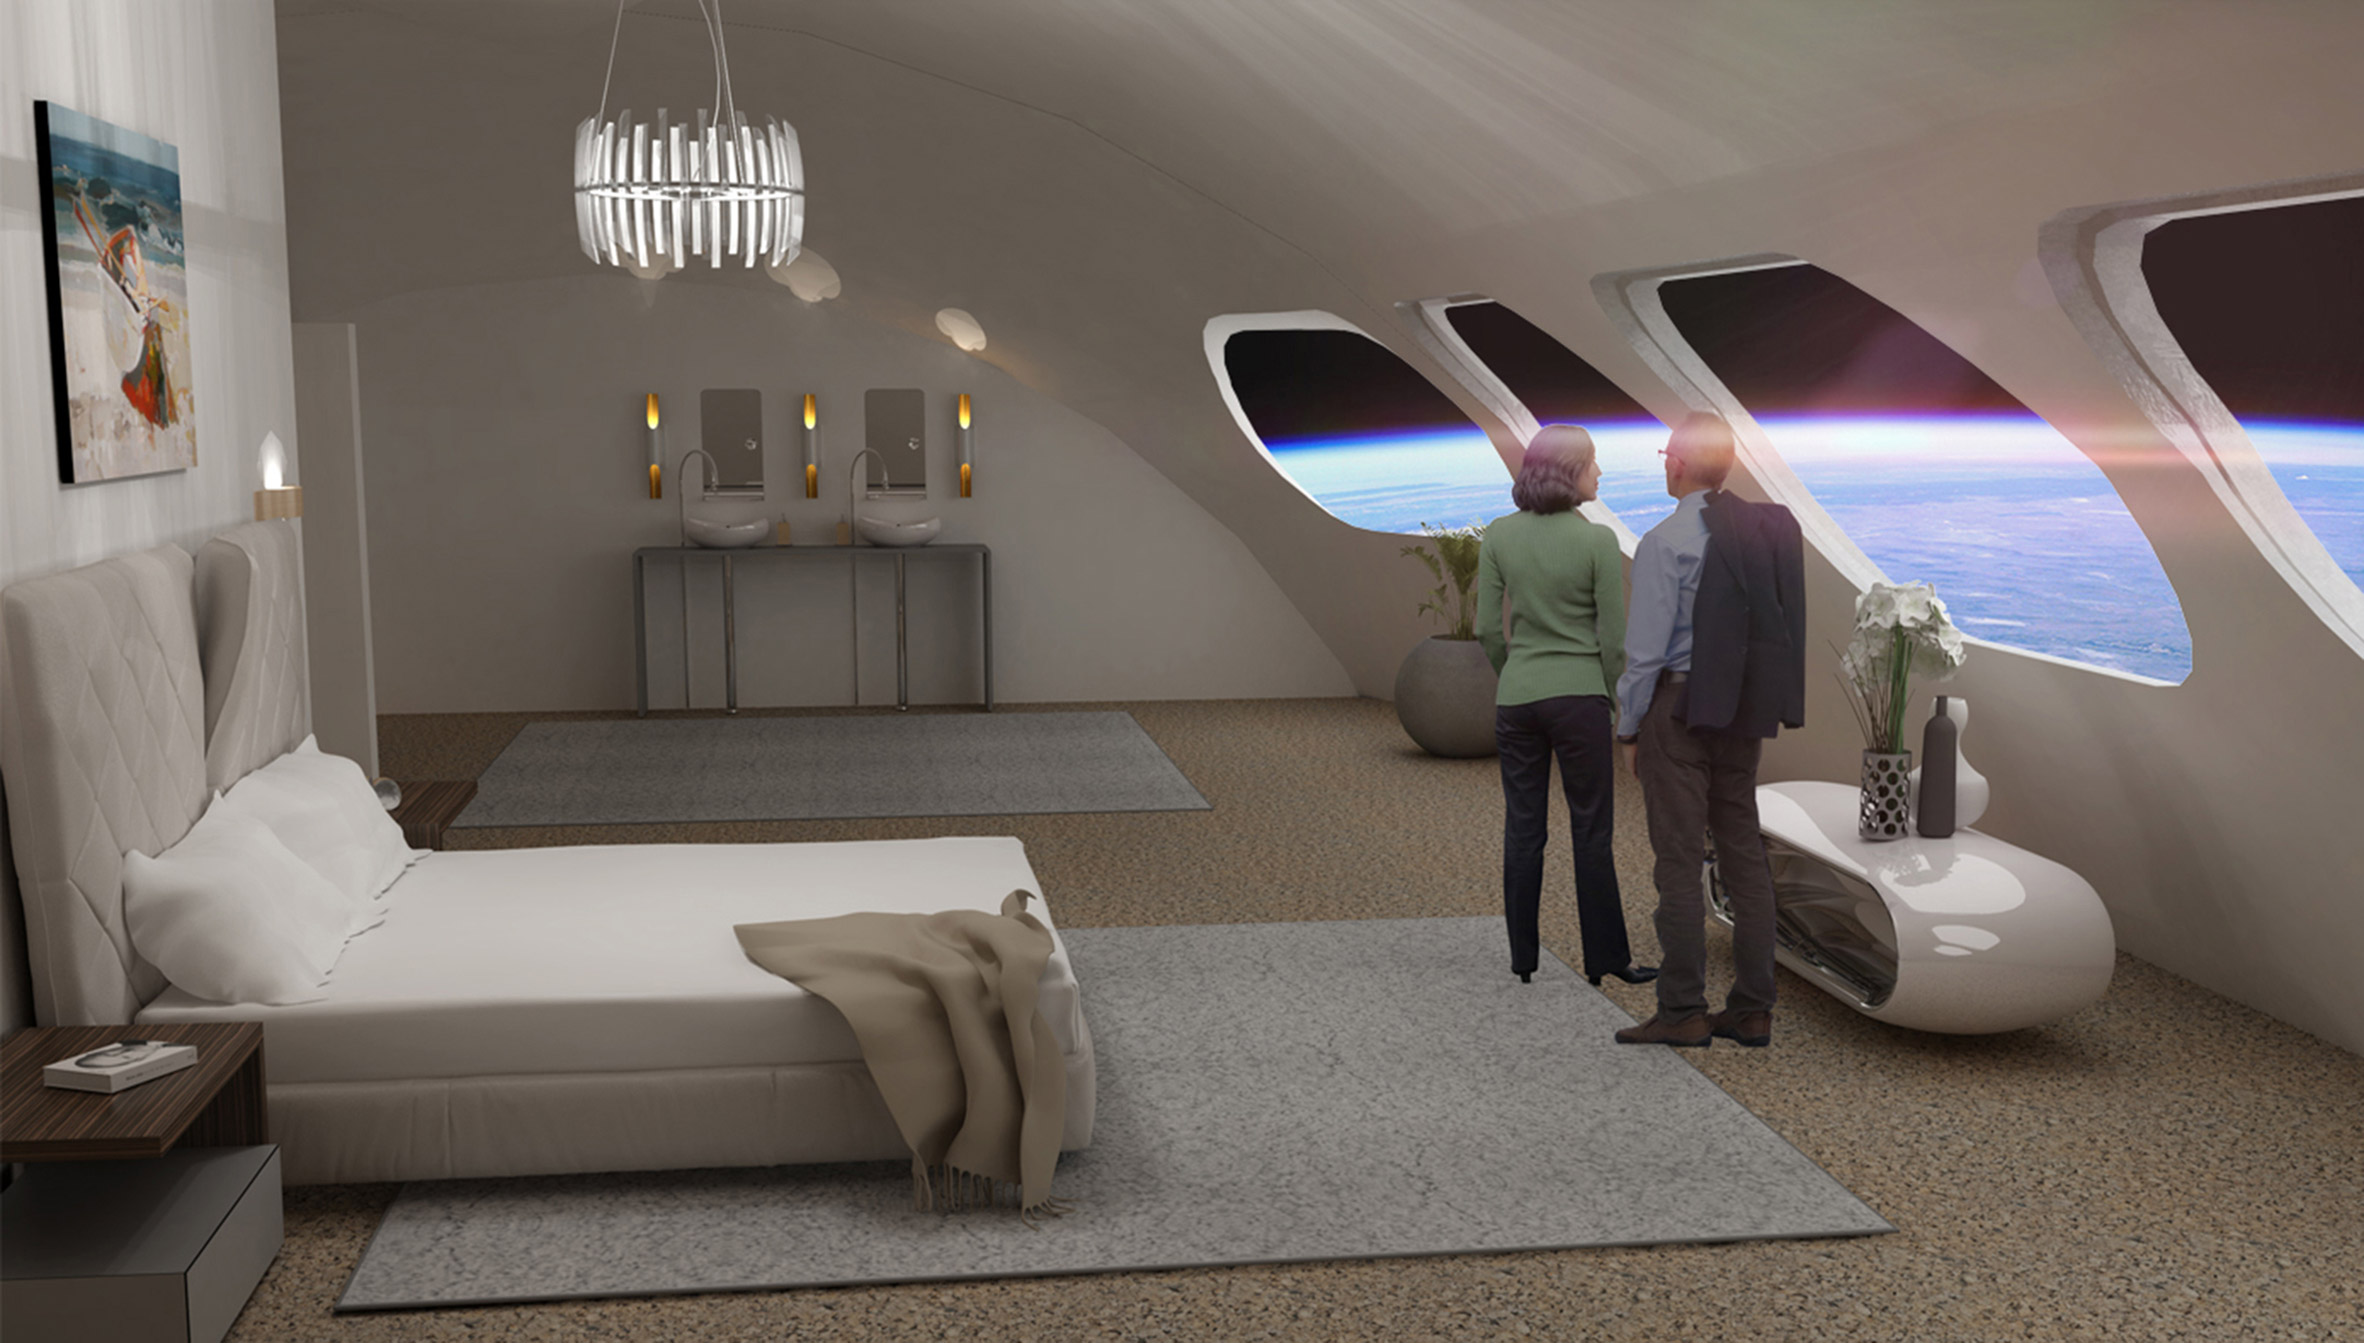 Bedroom at the space hotel